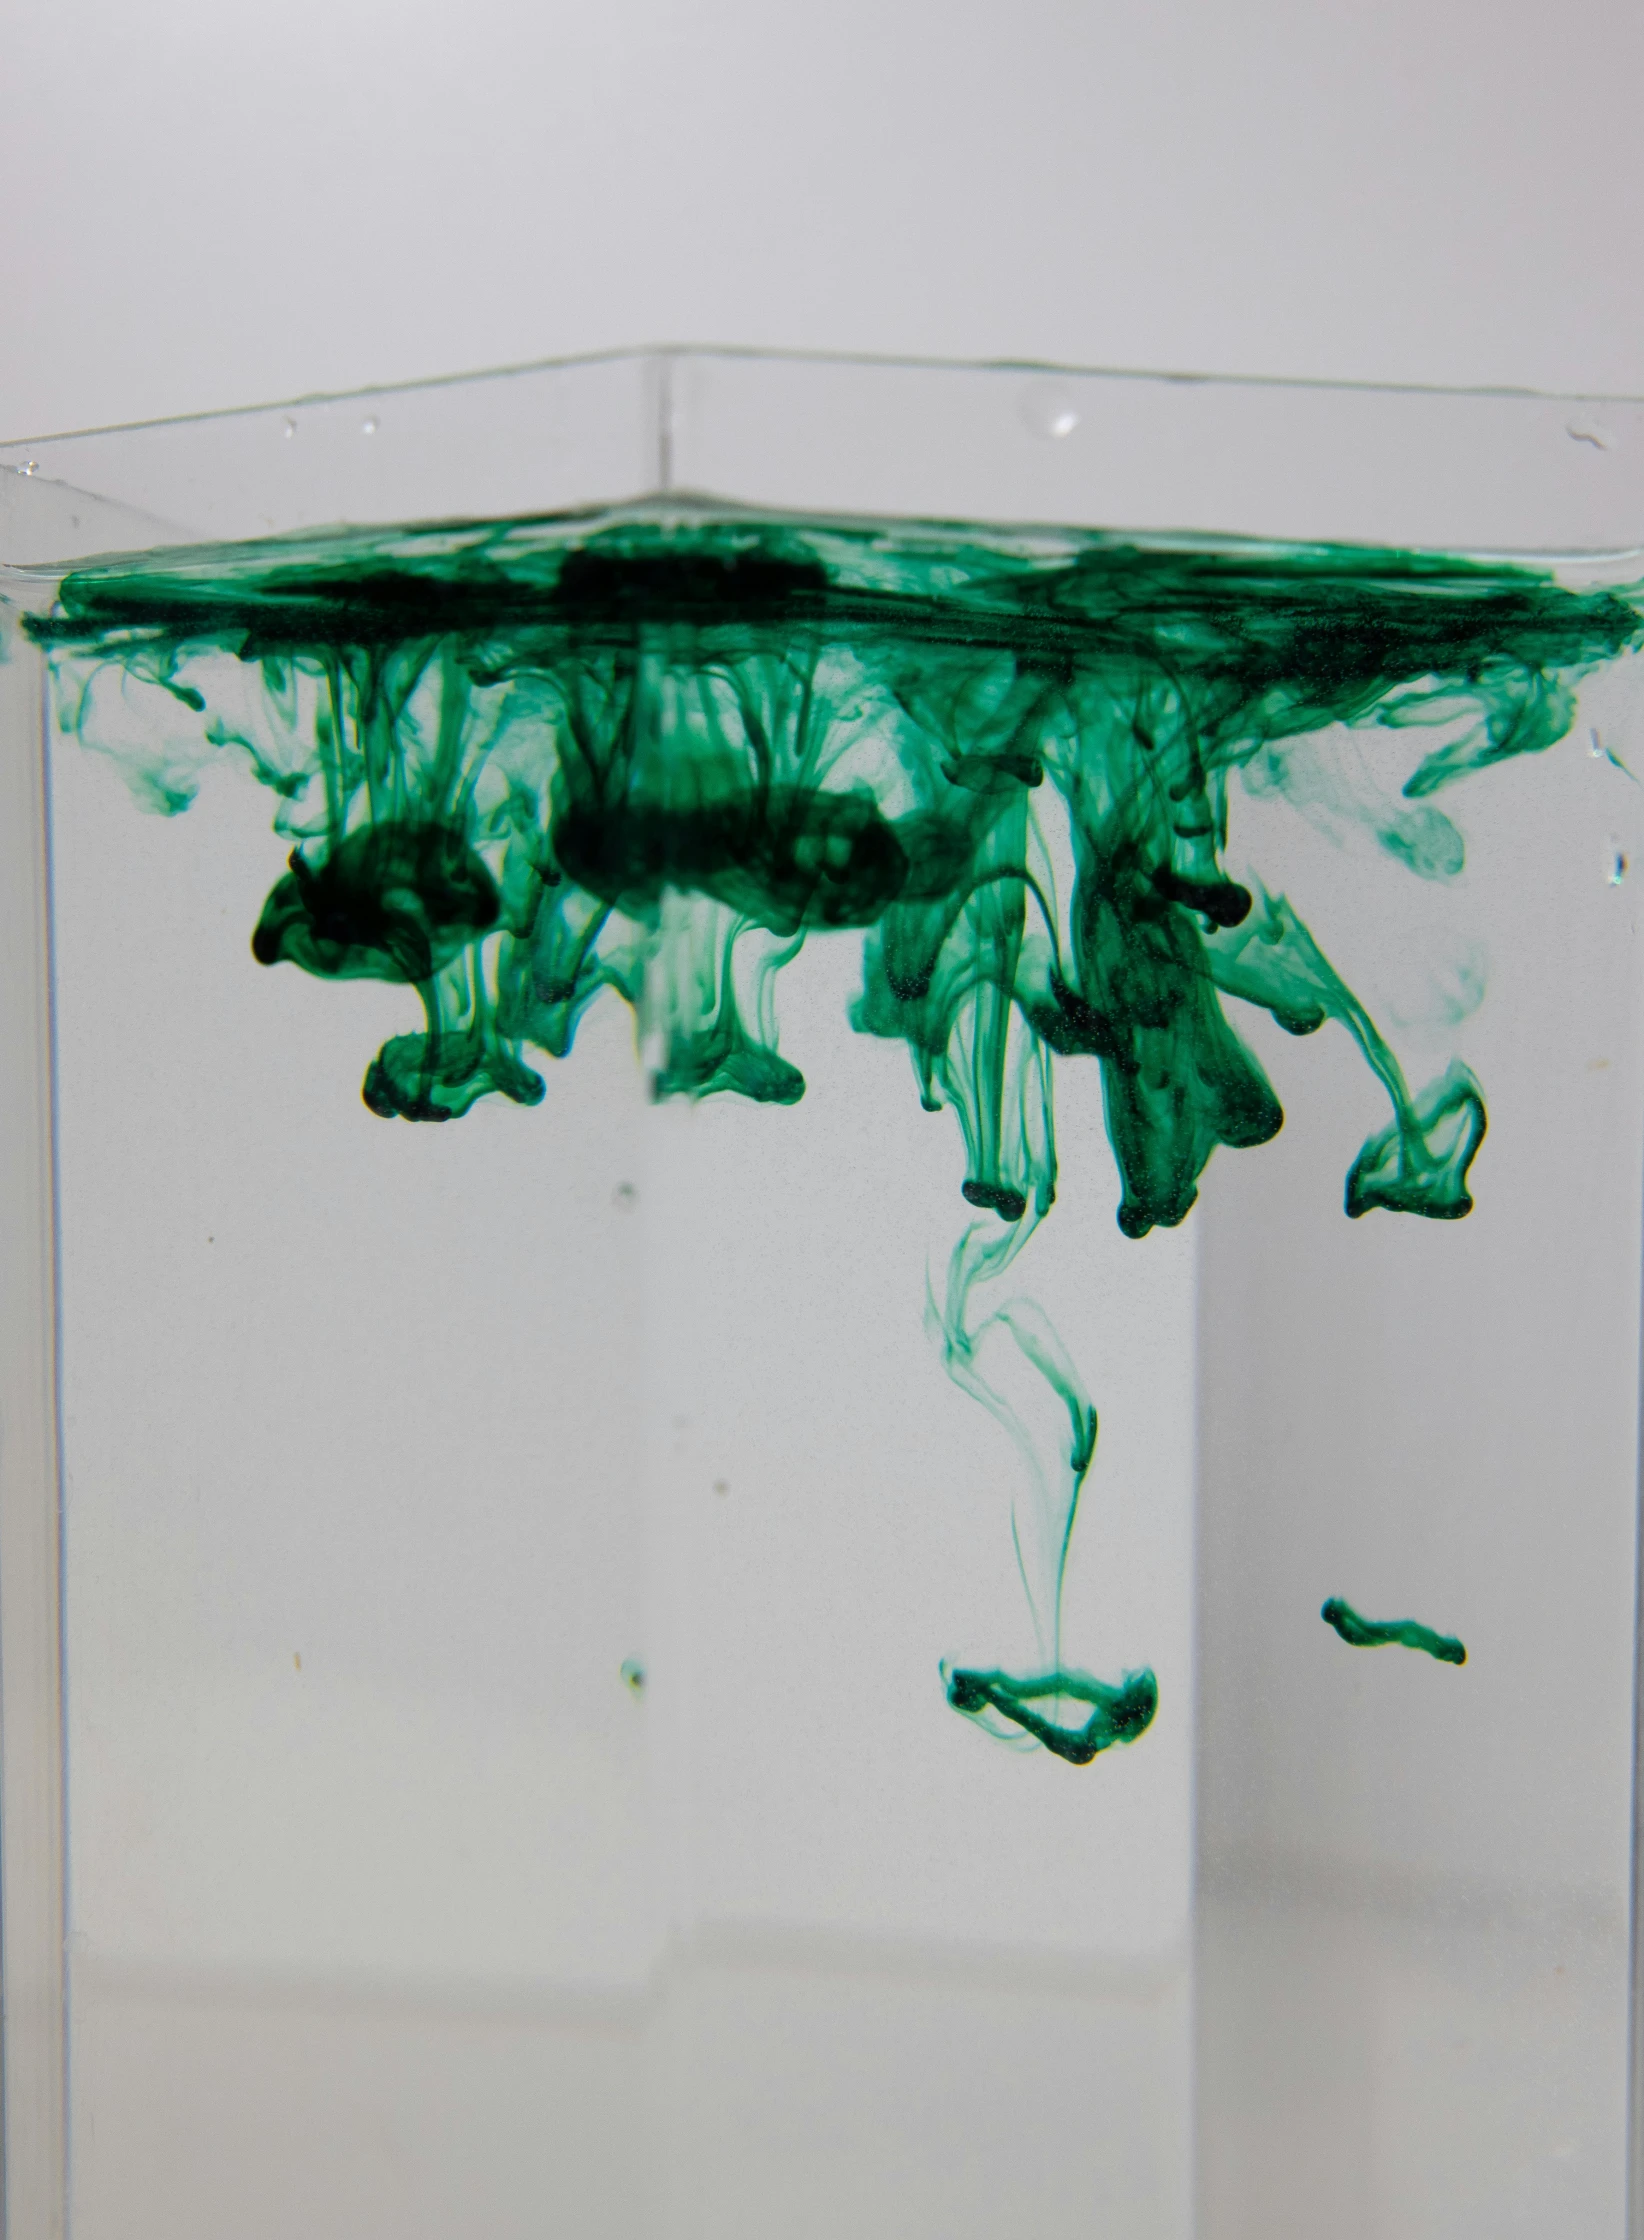 a glass filled with green liquid sitting on top of a table, a microscopic photo, inspired by Hu Zao, conceptual art, made of ferrofluid, sublittoral jellyfish schools, emily rajtkowski, exploding powder